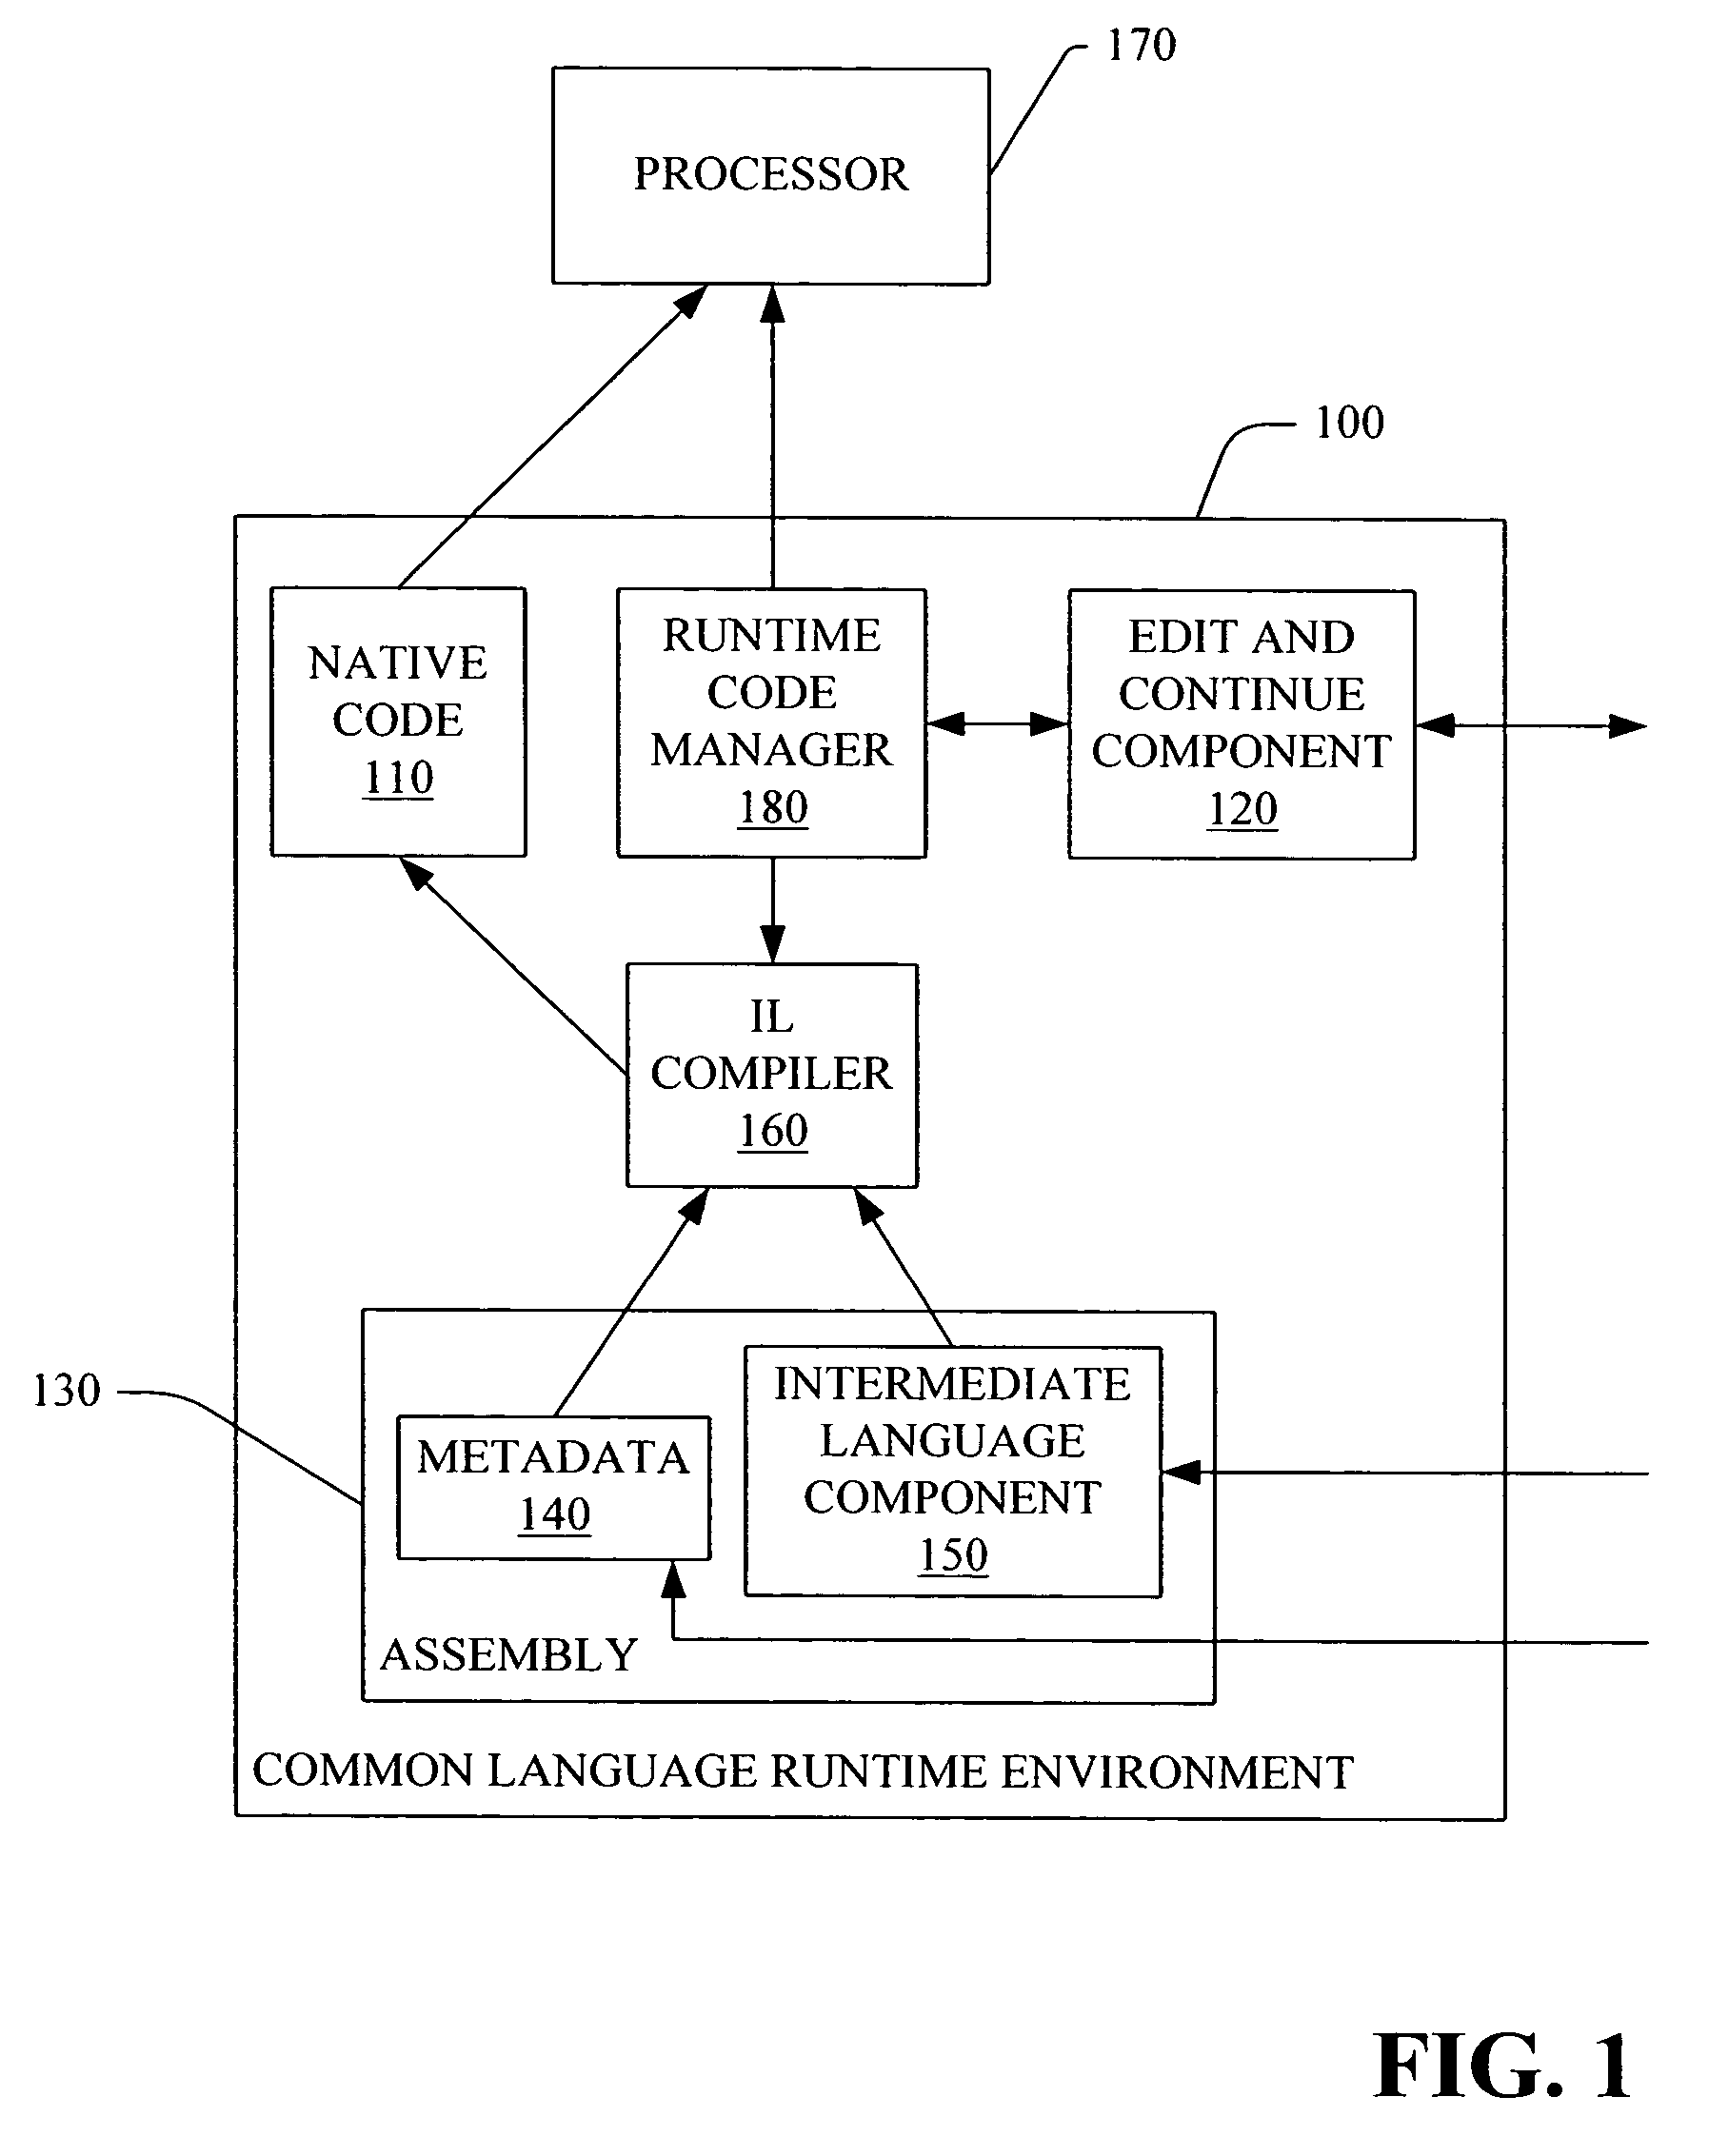 Method and system for program editing and debugging in a common language runtime environment